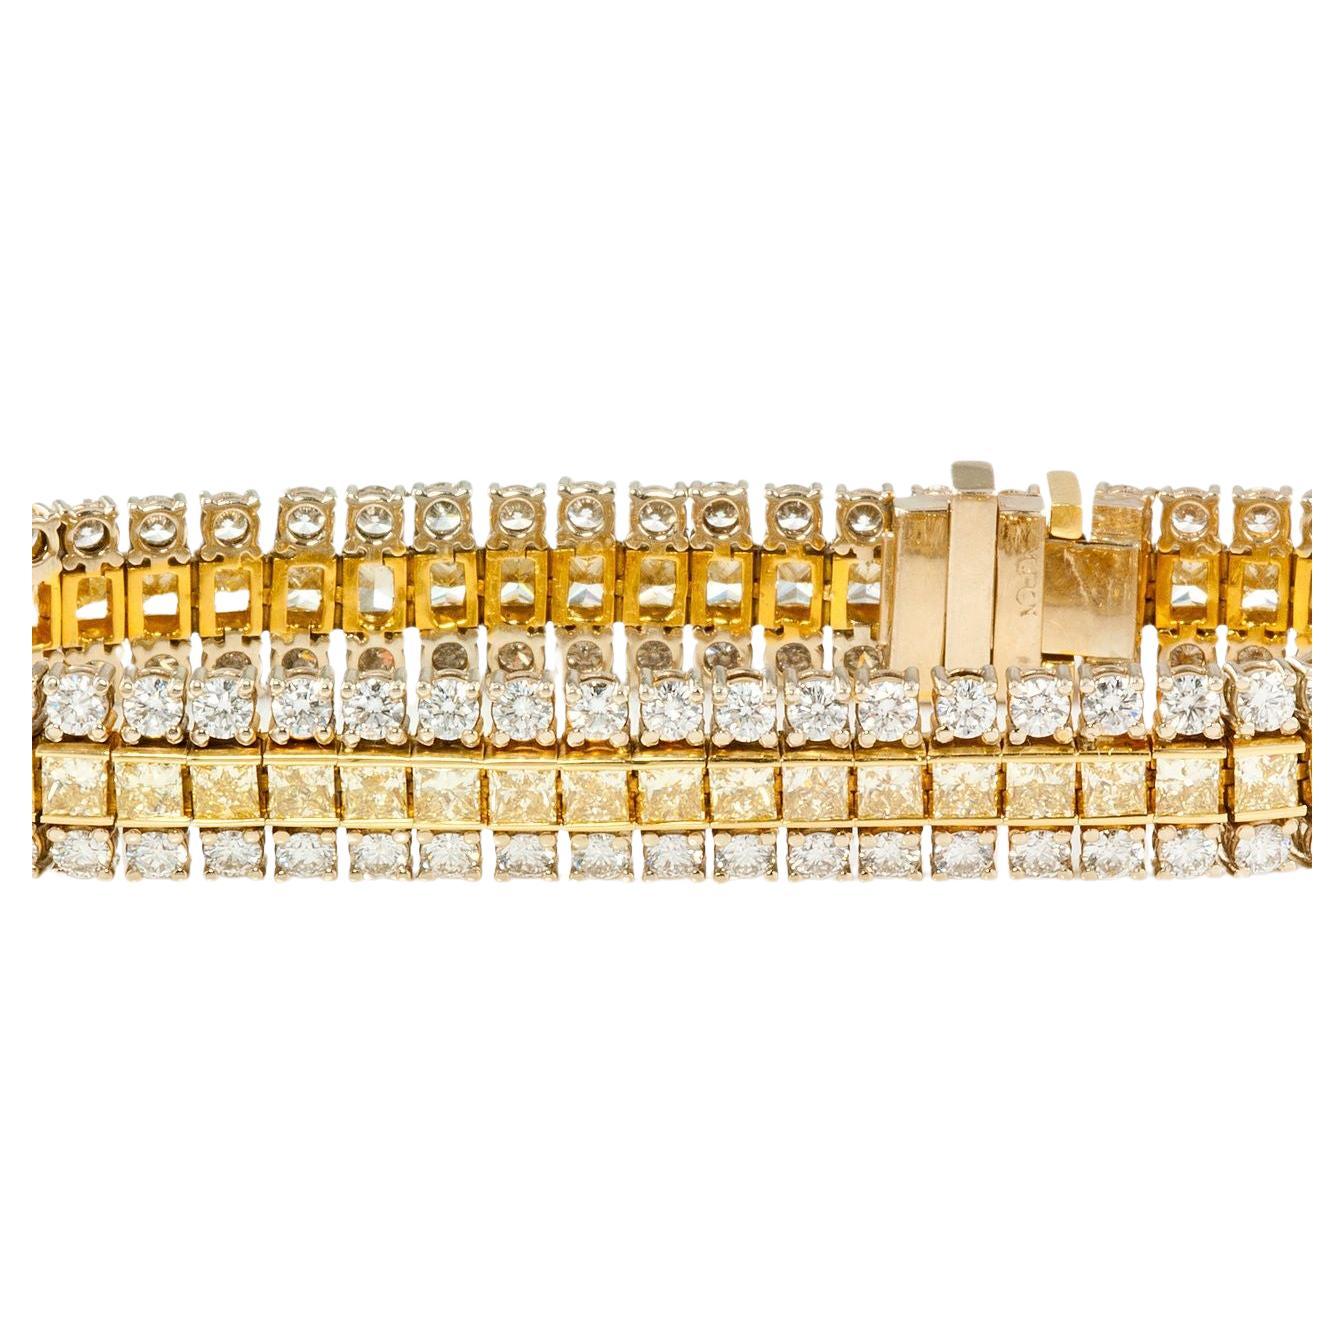 Presenting a show-stopping 16.30 carat total weight Three-Row 18KT Two-Tone Diamond Bracelet, a testament to luxury and craftsmanship.

Key Features:

18KT Two-Tone Gold: A blend of sophistication in yellow and white gold
Fancy Intense Yellow